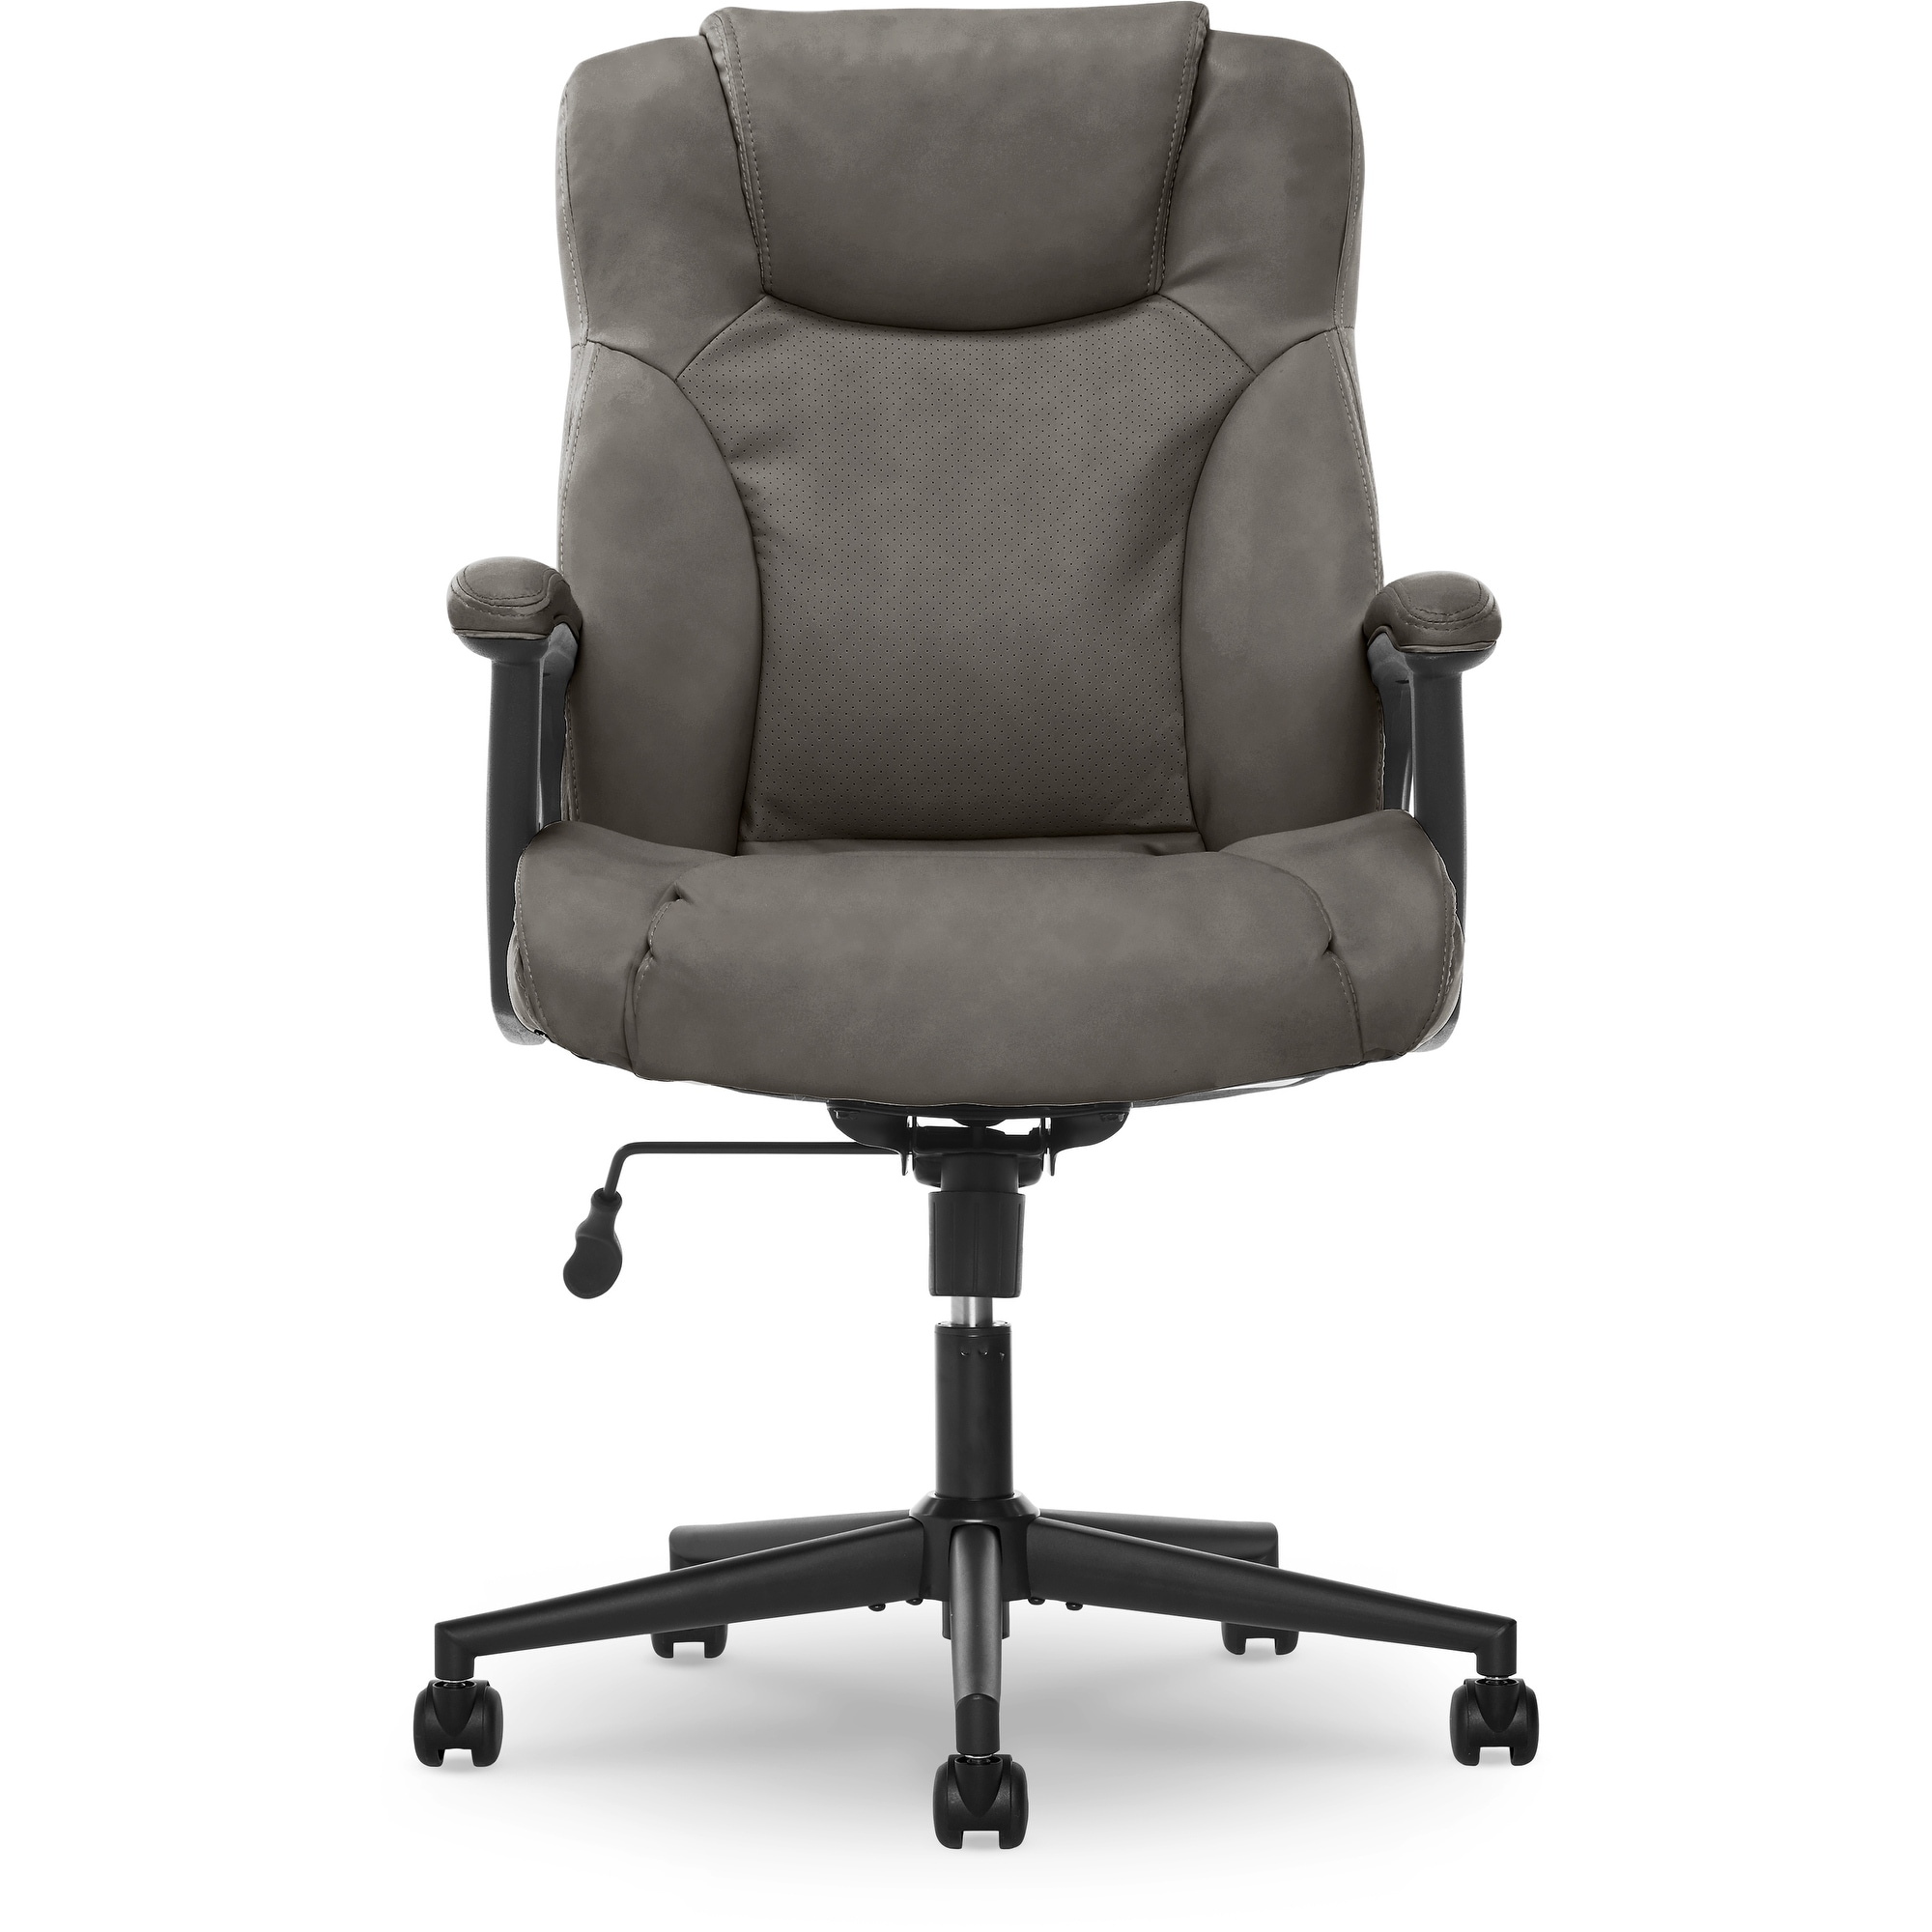 https://ak1.ostkcdn.com/images/products/is/images/direct/93f2ebaaccf742030a72f2ecb12f0b299a528bf4/Serta-Connor-Executive-Office-Chair%2C-Ergonomic-Computer-Chair-with-Layered-Body-Pillows%2C-Contoured-Lumbar%2C-Adjustable-Seat.jpg